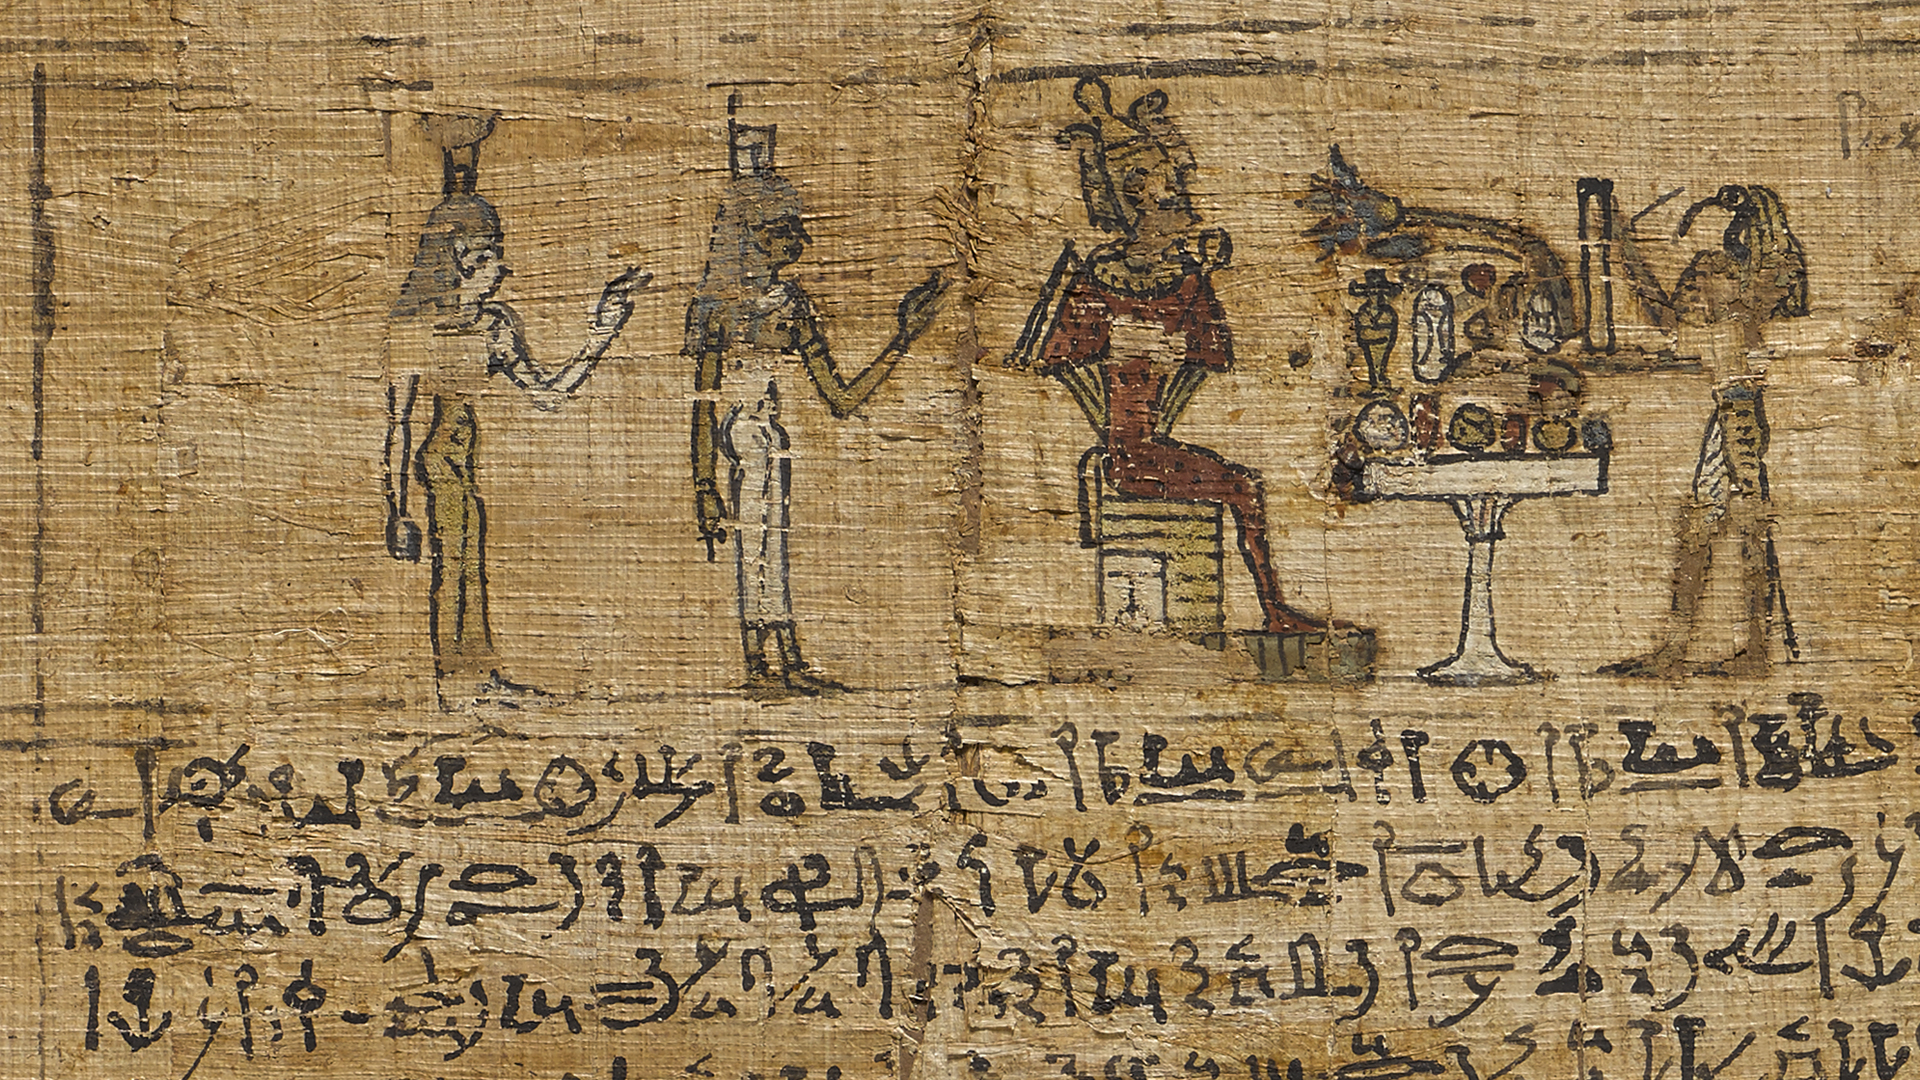 Column 11 of the funerary papyrus of Montsuef, Thebes, Egypt, 9 BC.